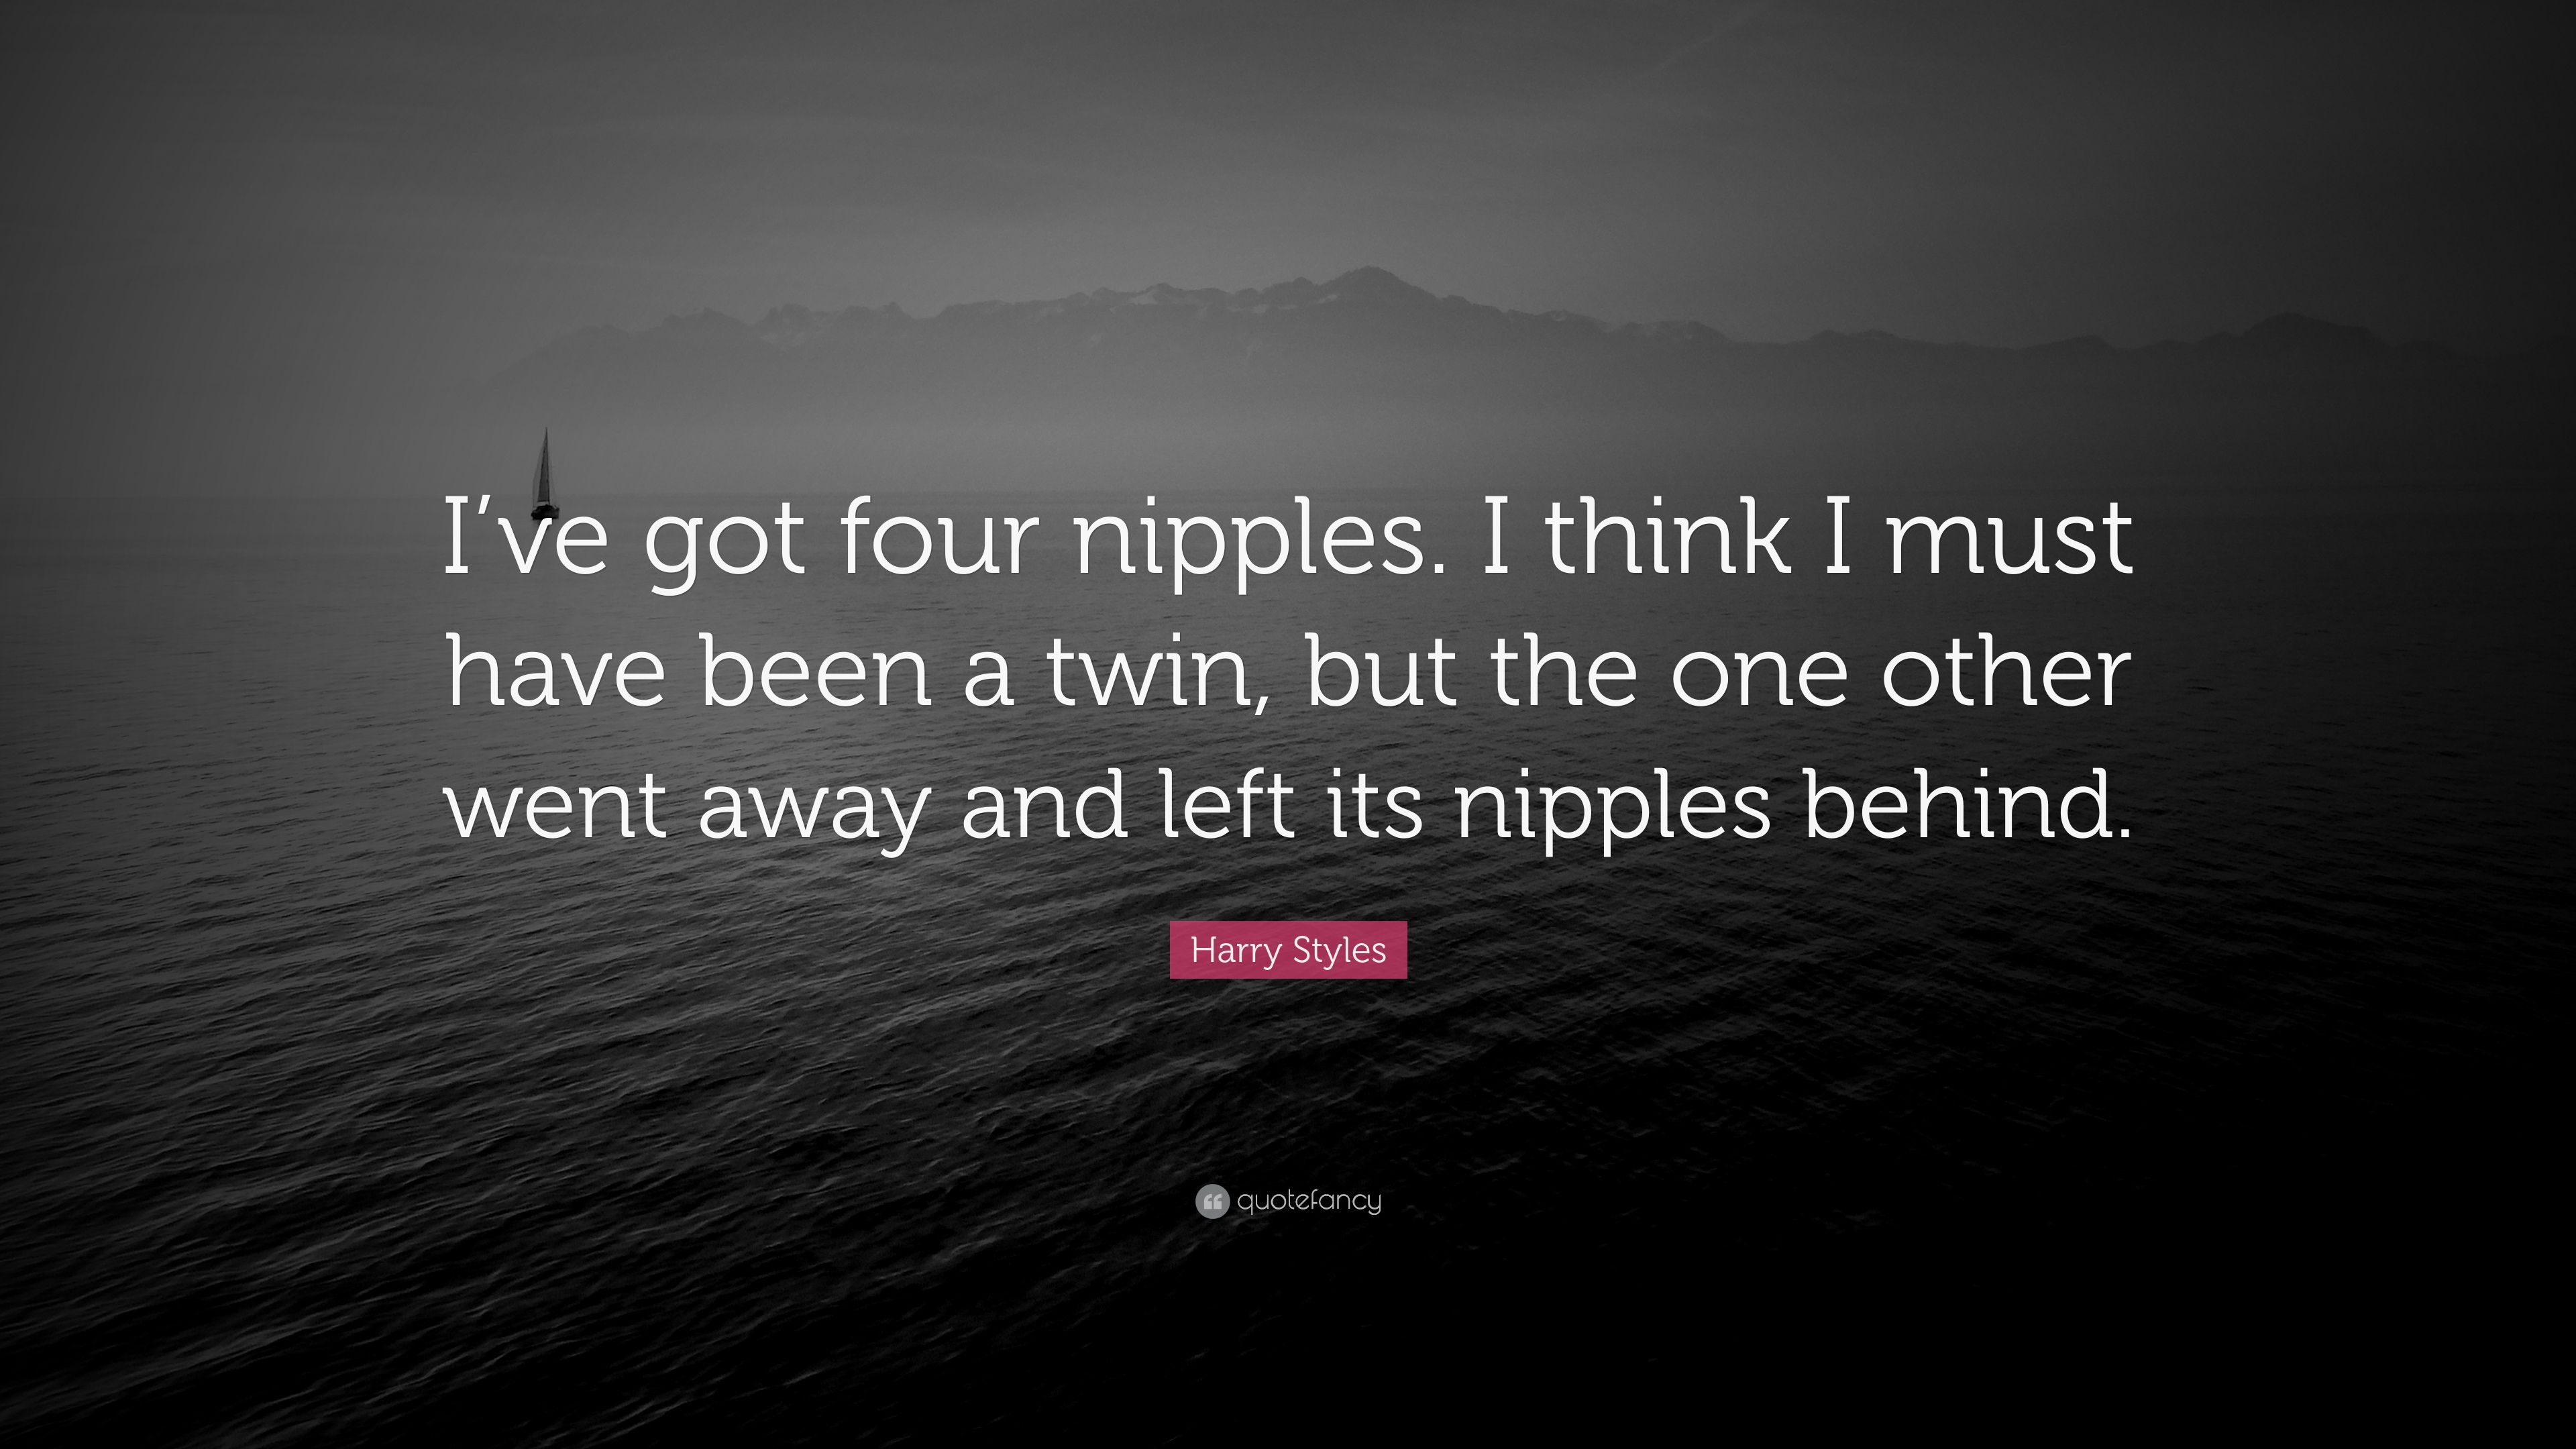 Harry Styles Quote: “I've got four nipples. I think I must have been a twin, but the one other went away and left its nipples behind.” (10 wallpaper)